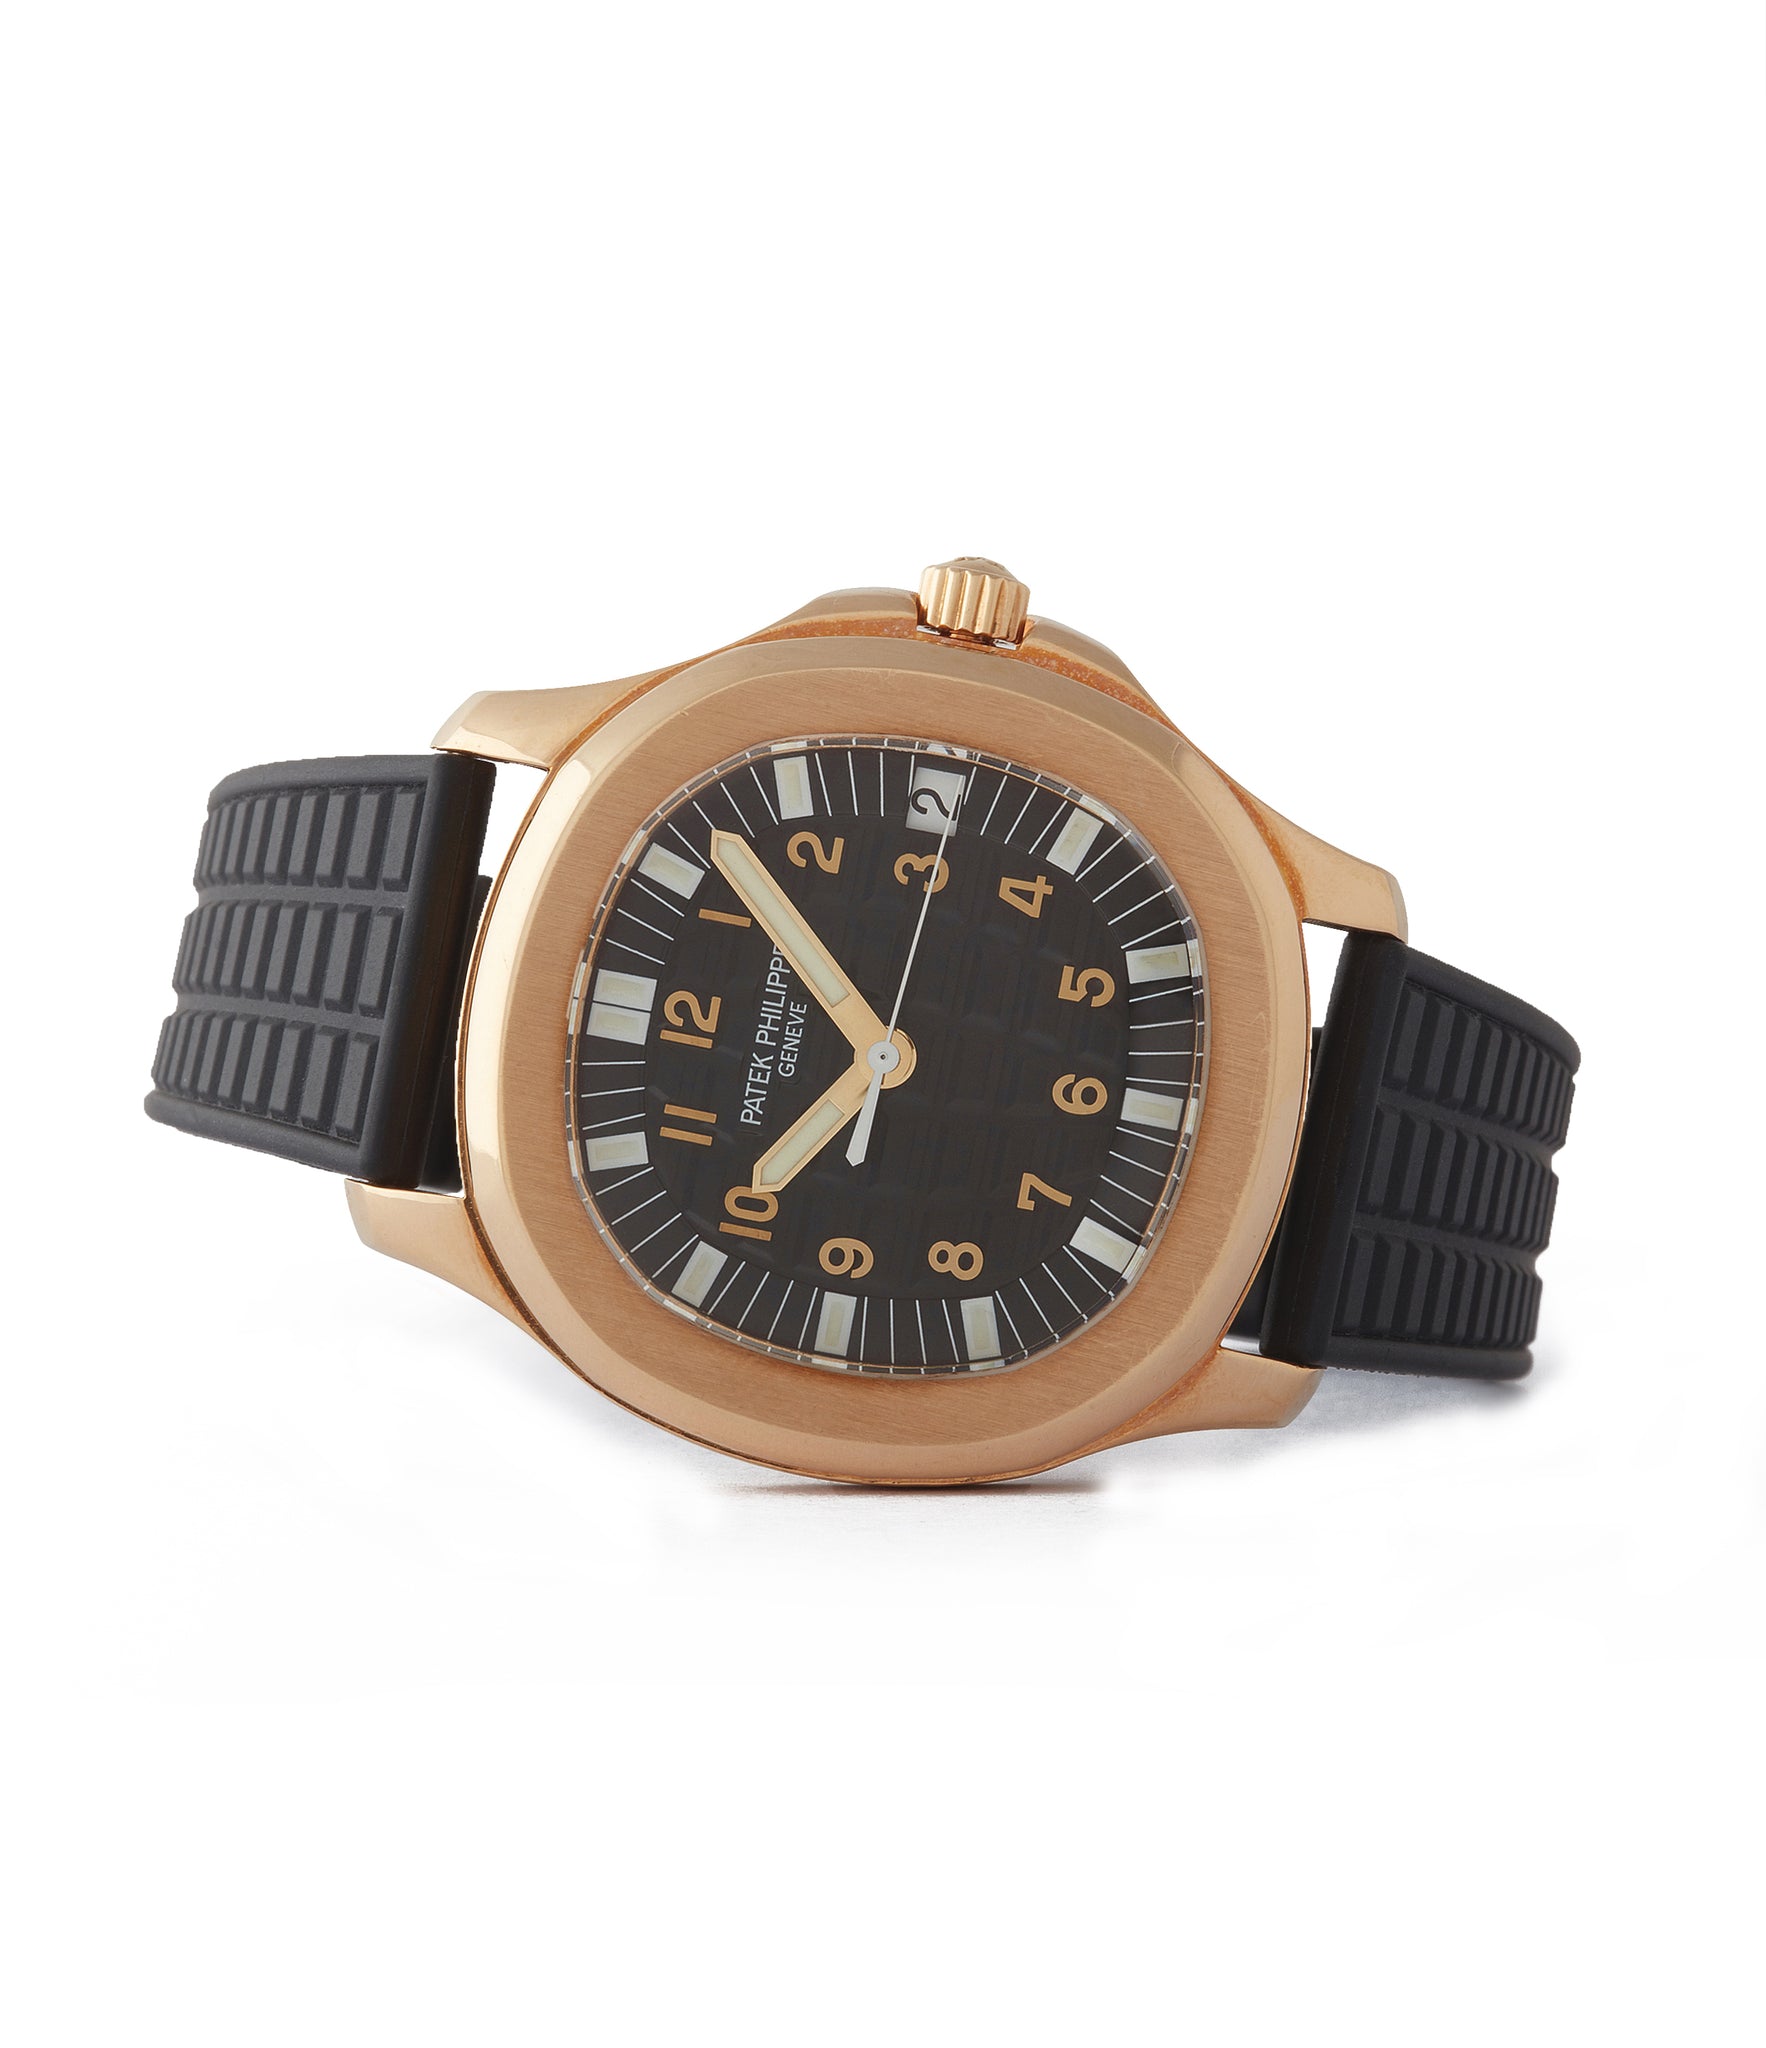 side-shot yellow gold Patek Philippe Aquanaut 5065J luxury sport watch for sale online at A Collected Man London UK specialist of rare watches